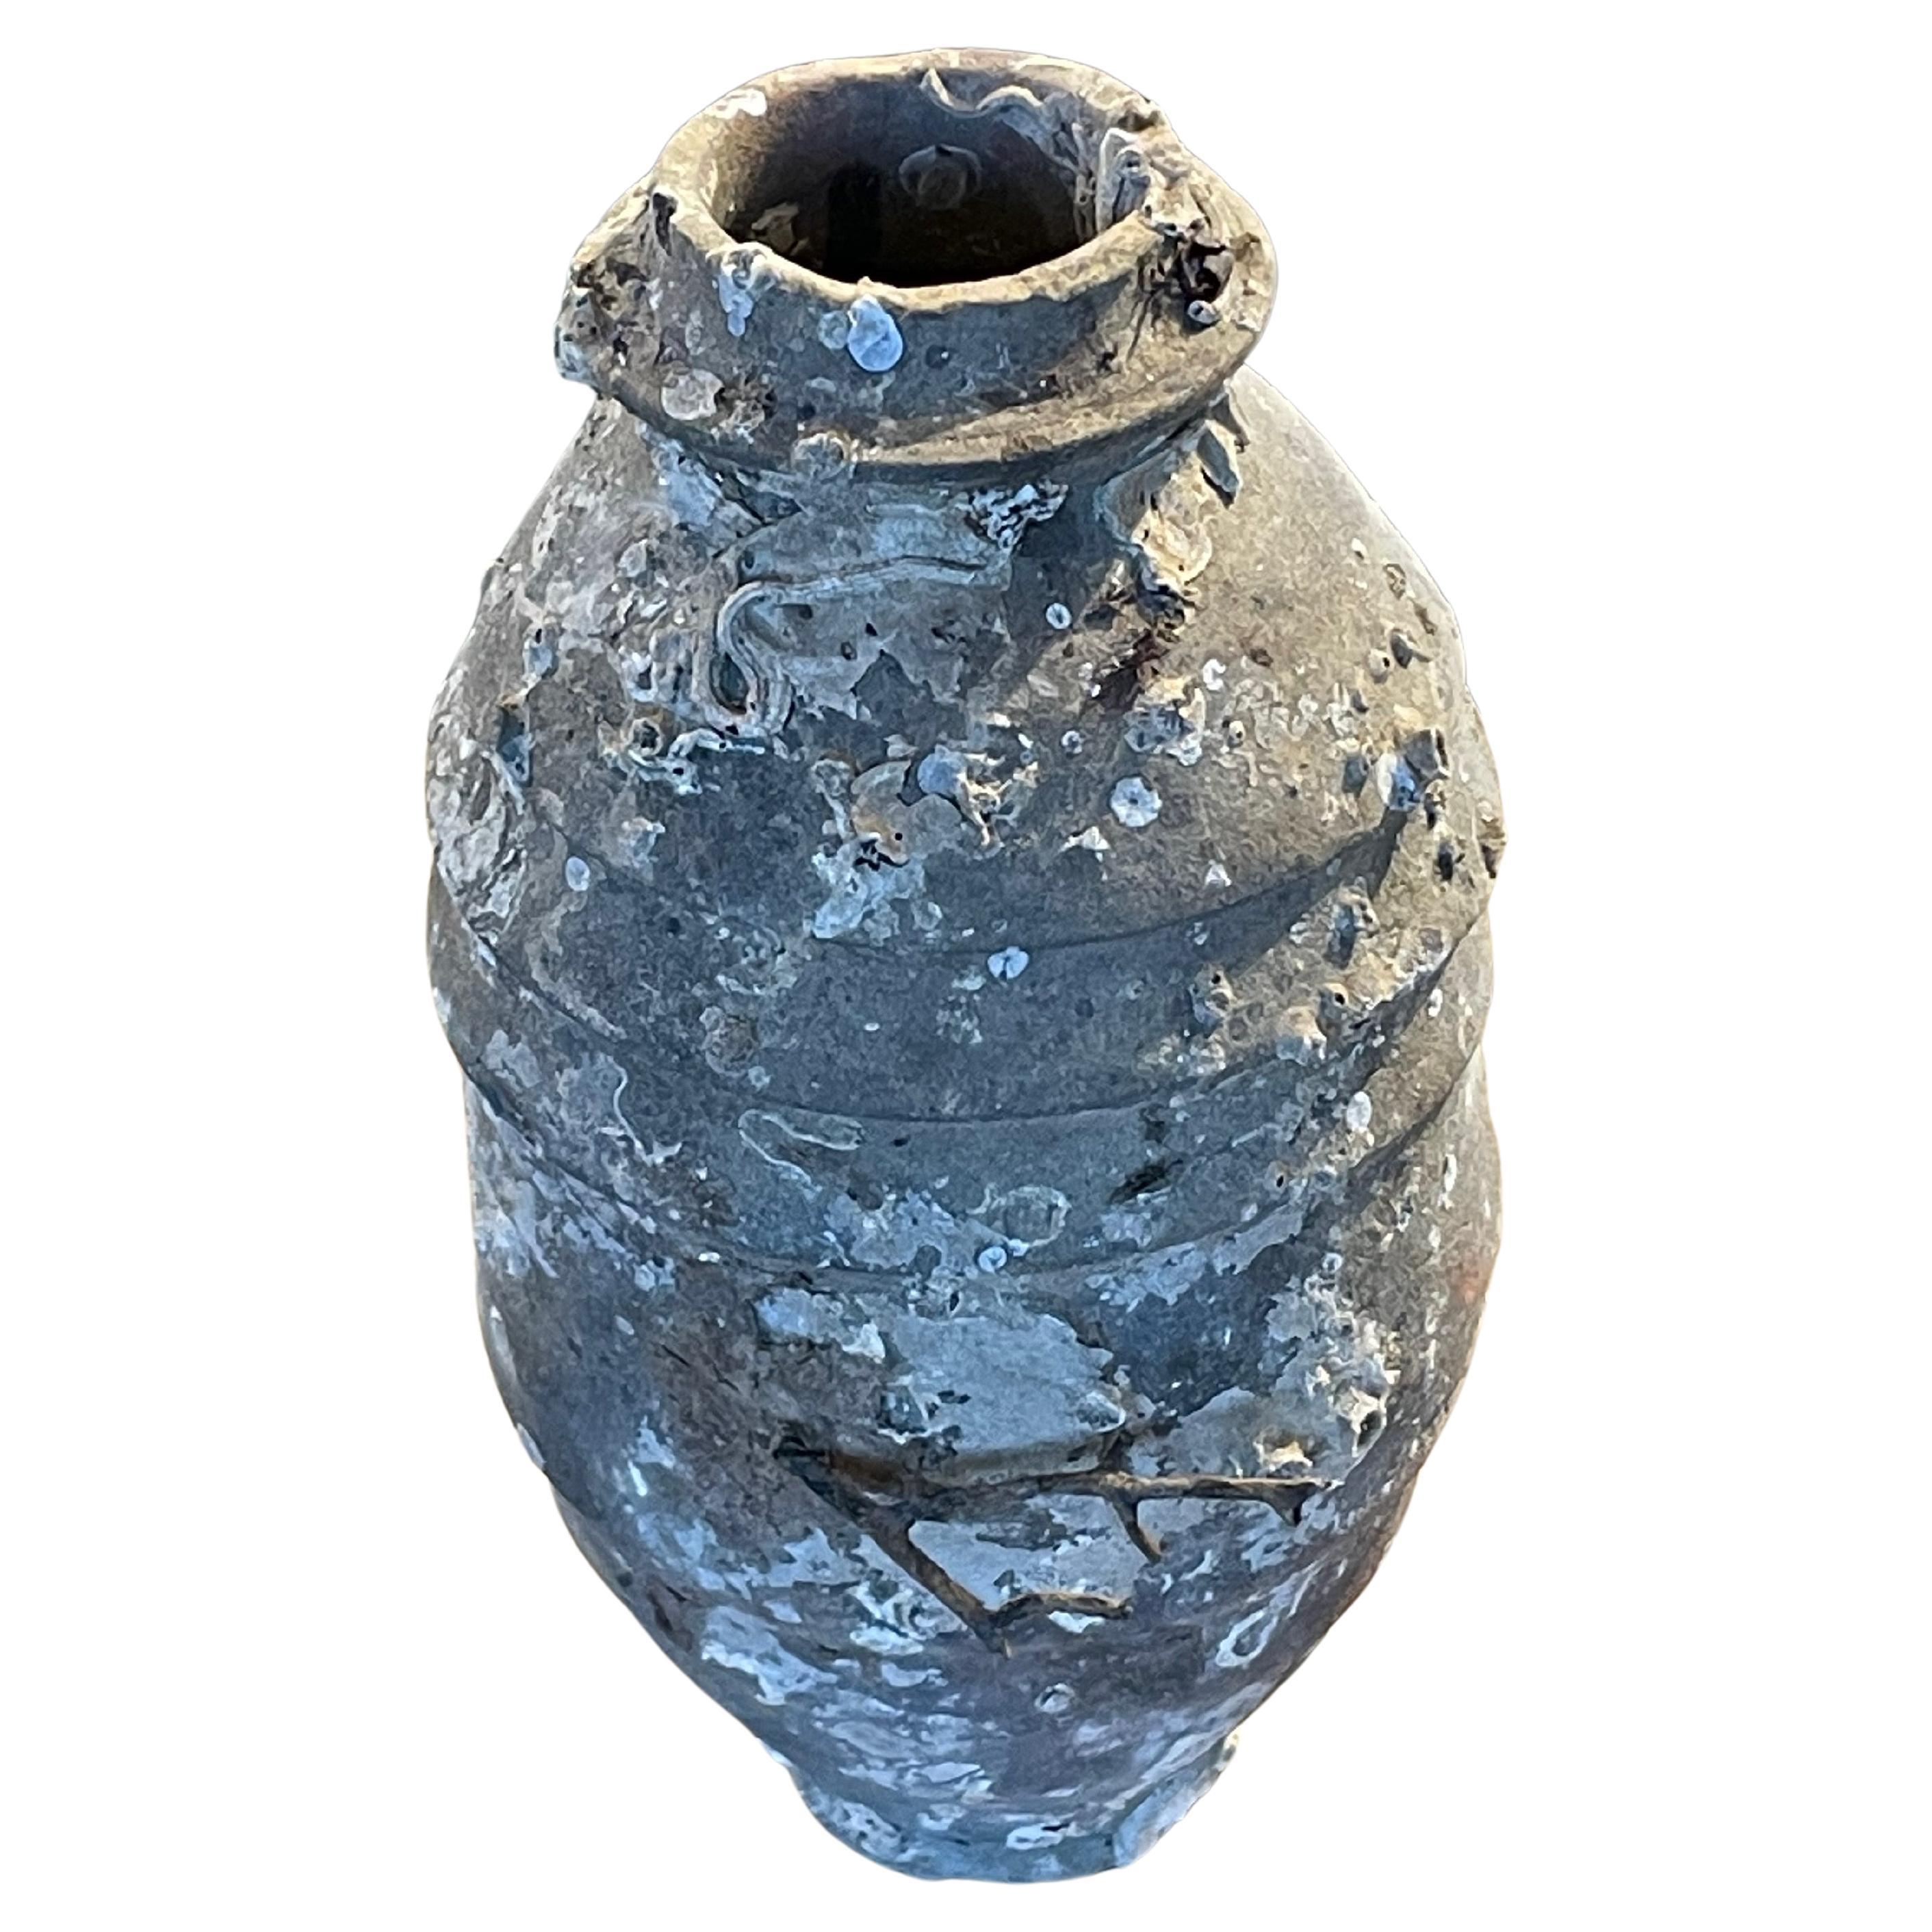 13th Century Song Dynasty Ship Wrecked Vase, China